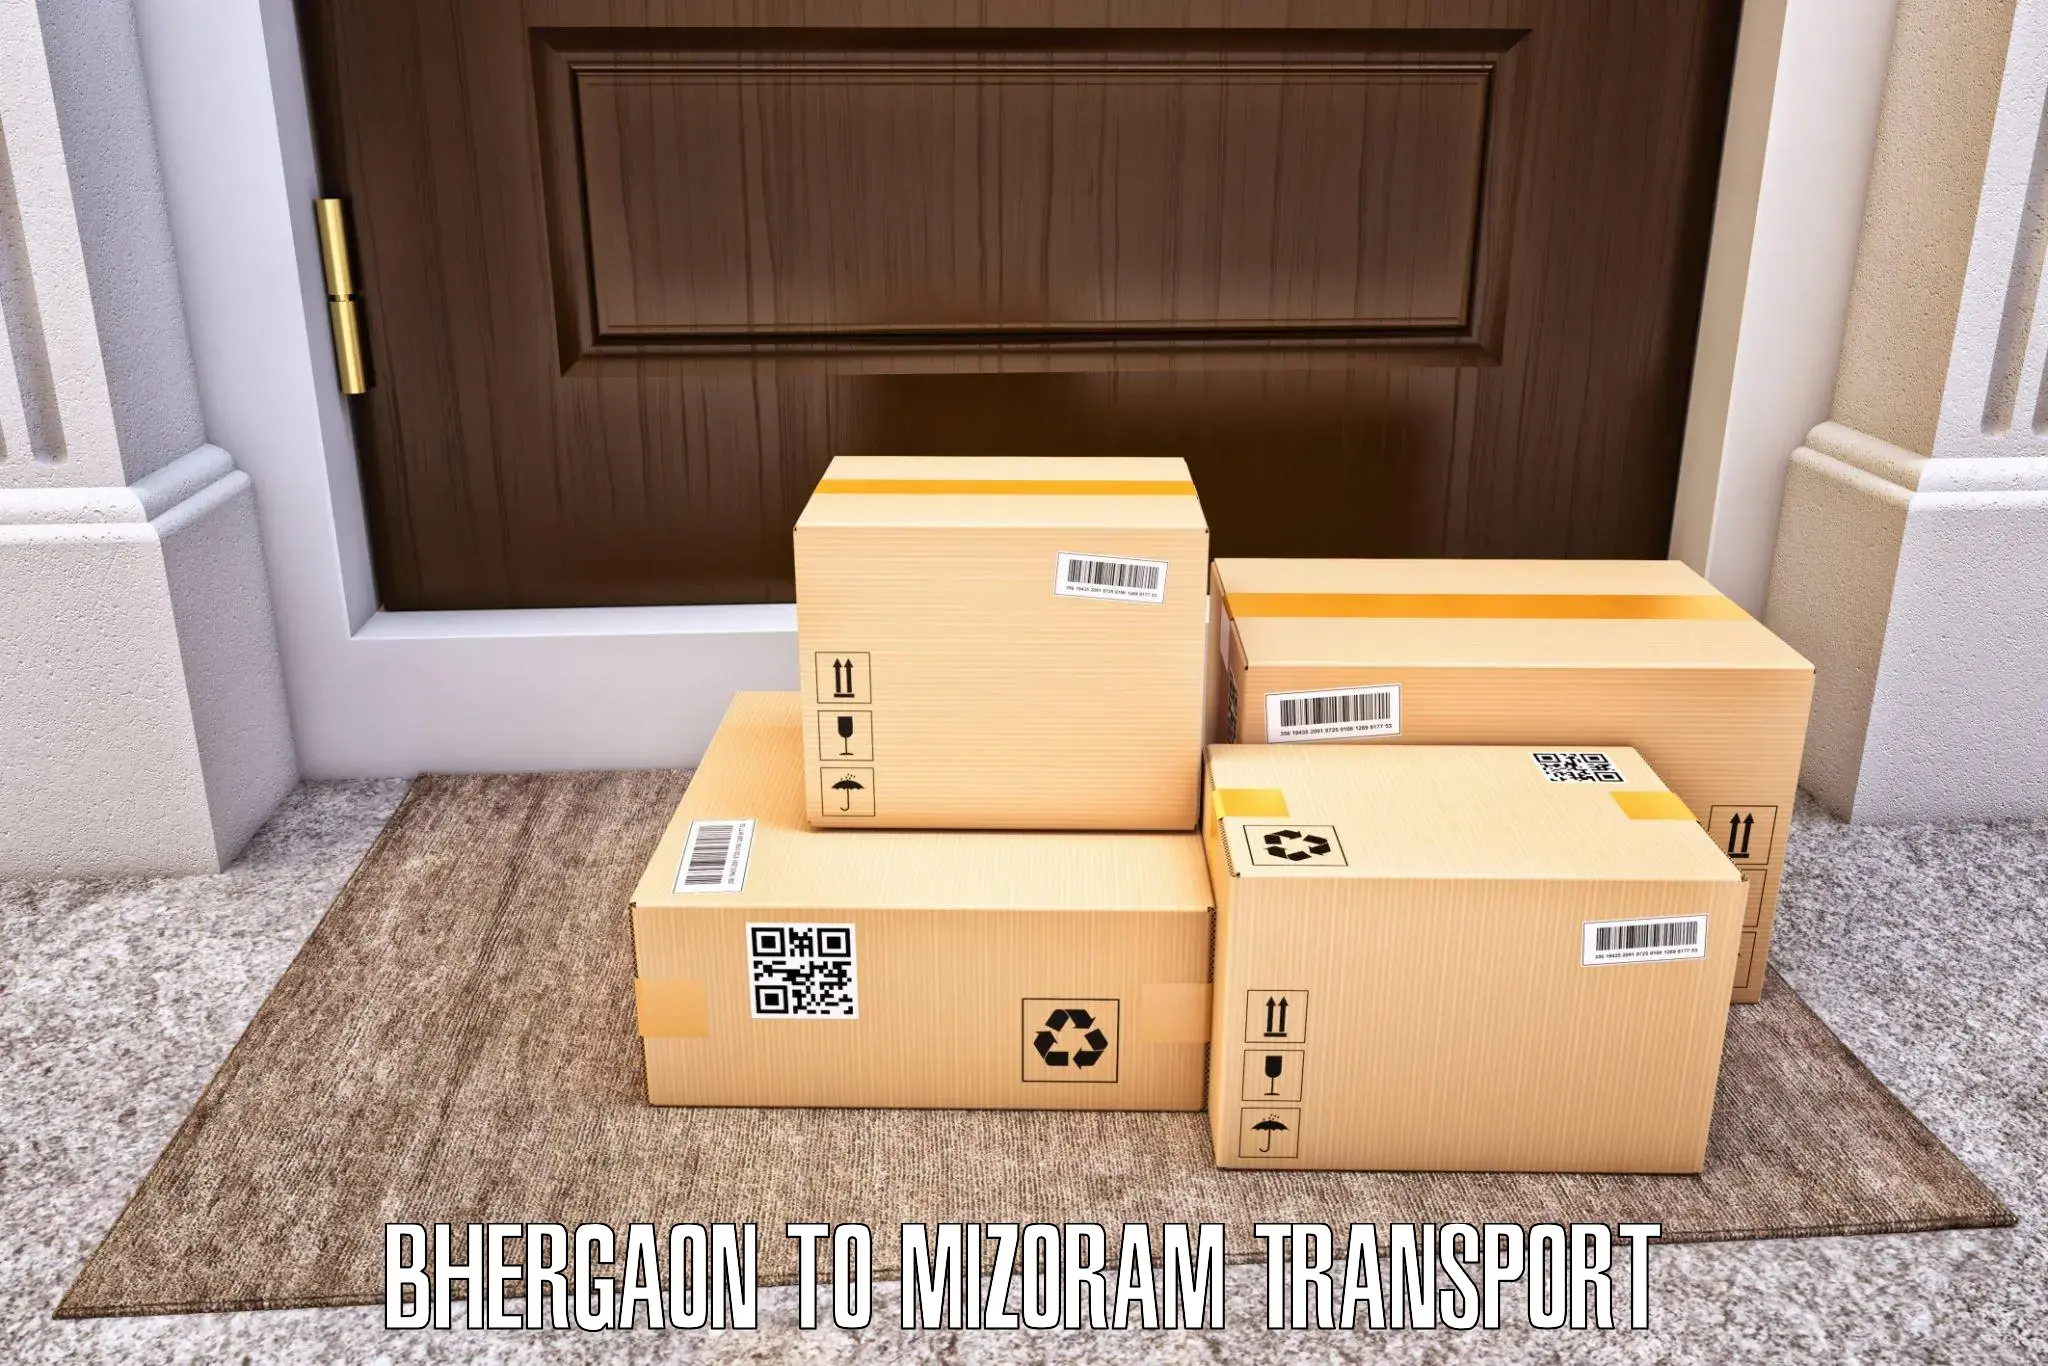 Nationwide transport services Bhergaon to Siaha